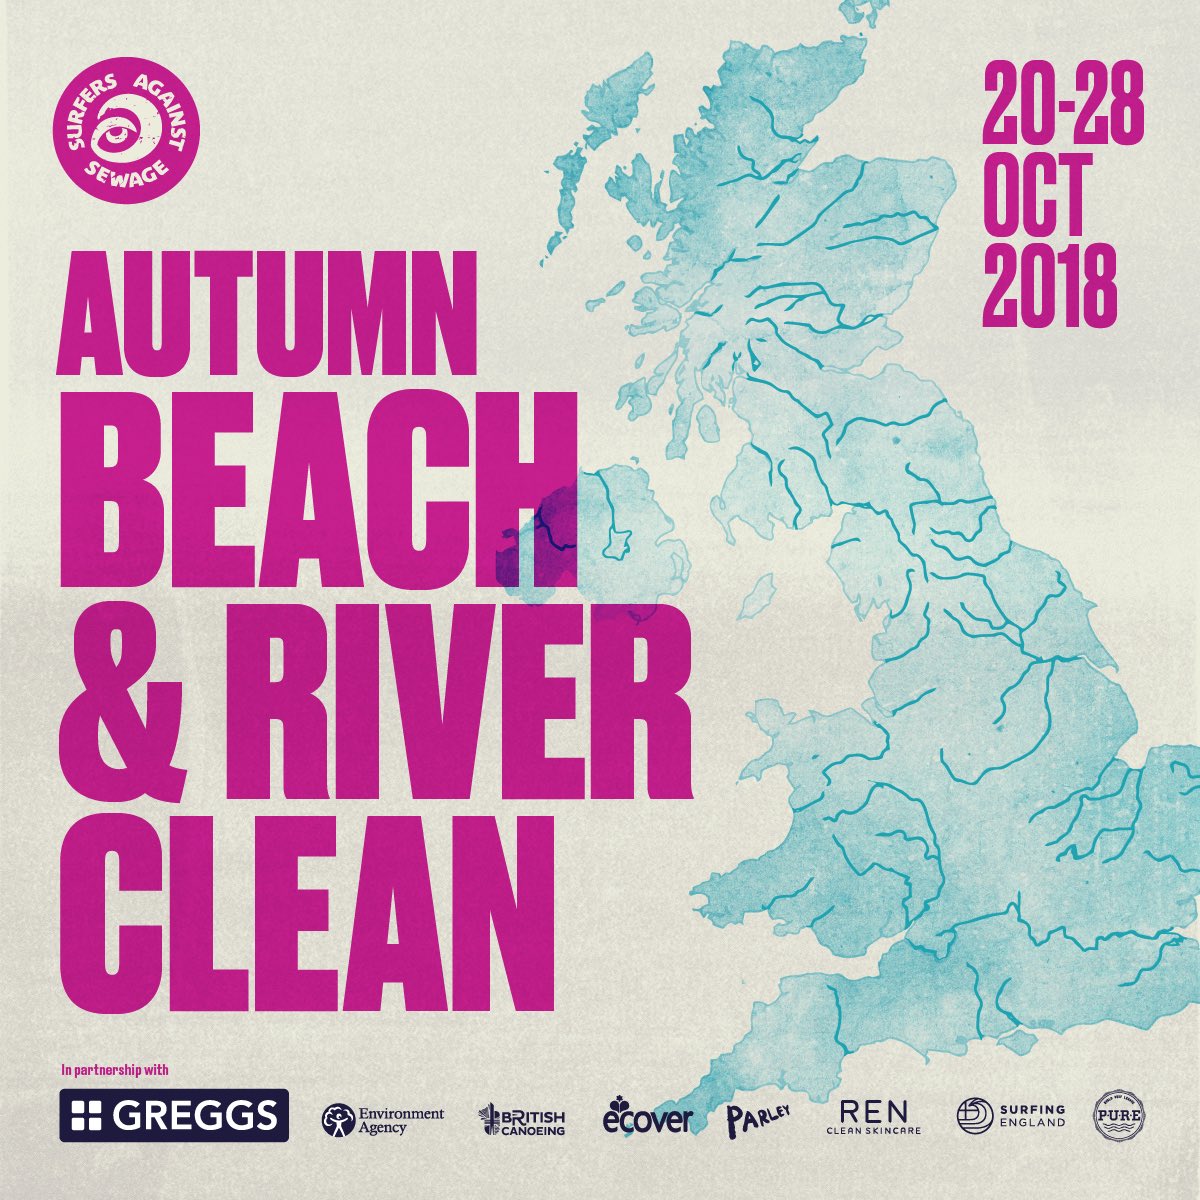 Join us on Sat Oct 27th as we clean up Penzance Prom! We will be tackling the town's seafront from Wherrytown to the Jubilee Pool including the beaches and surrounding public spaces. Full details here: facebook.com/plasticfreepen…
#plasticfreepz #plasticfreecommunitues #abrc18